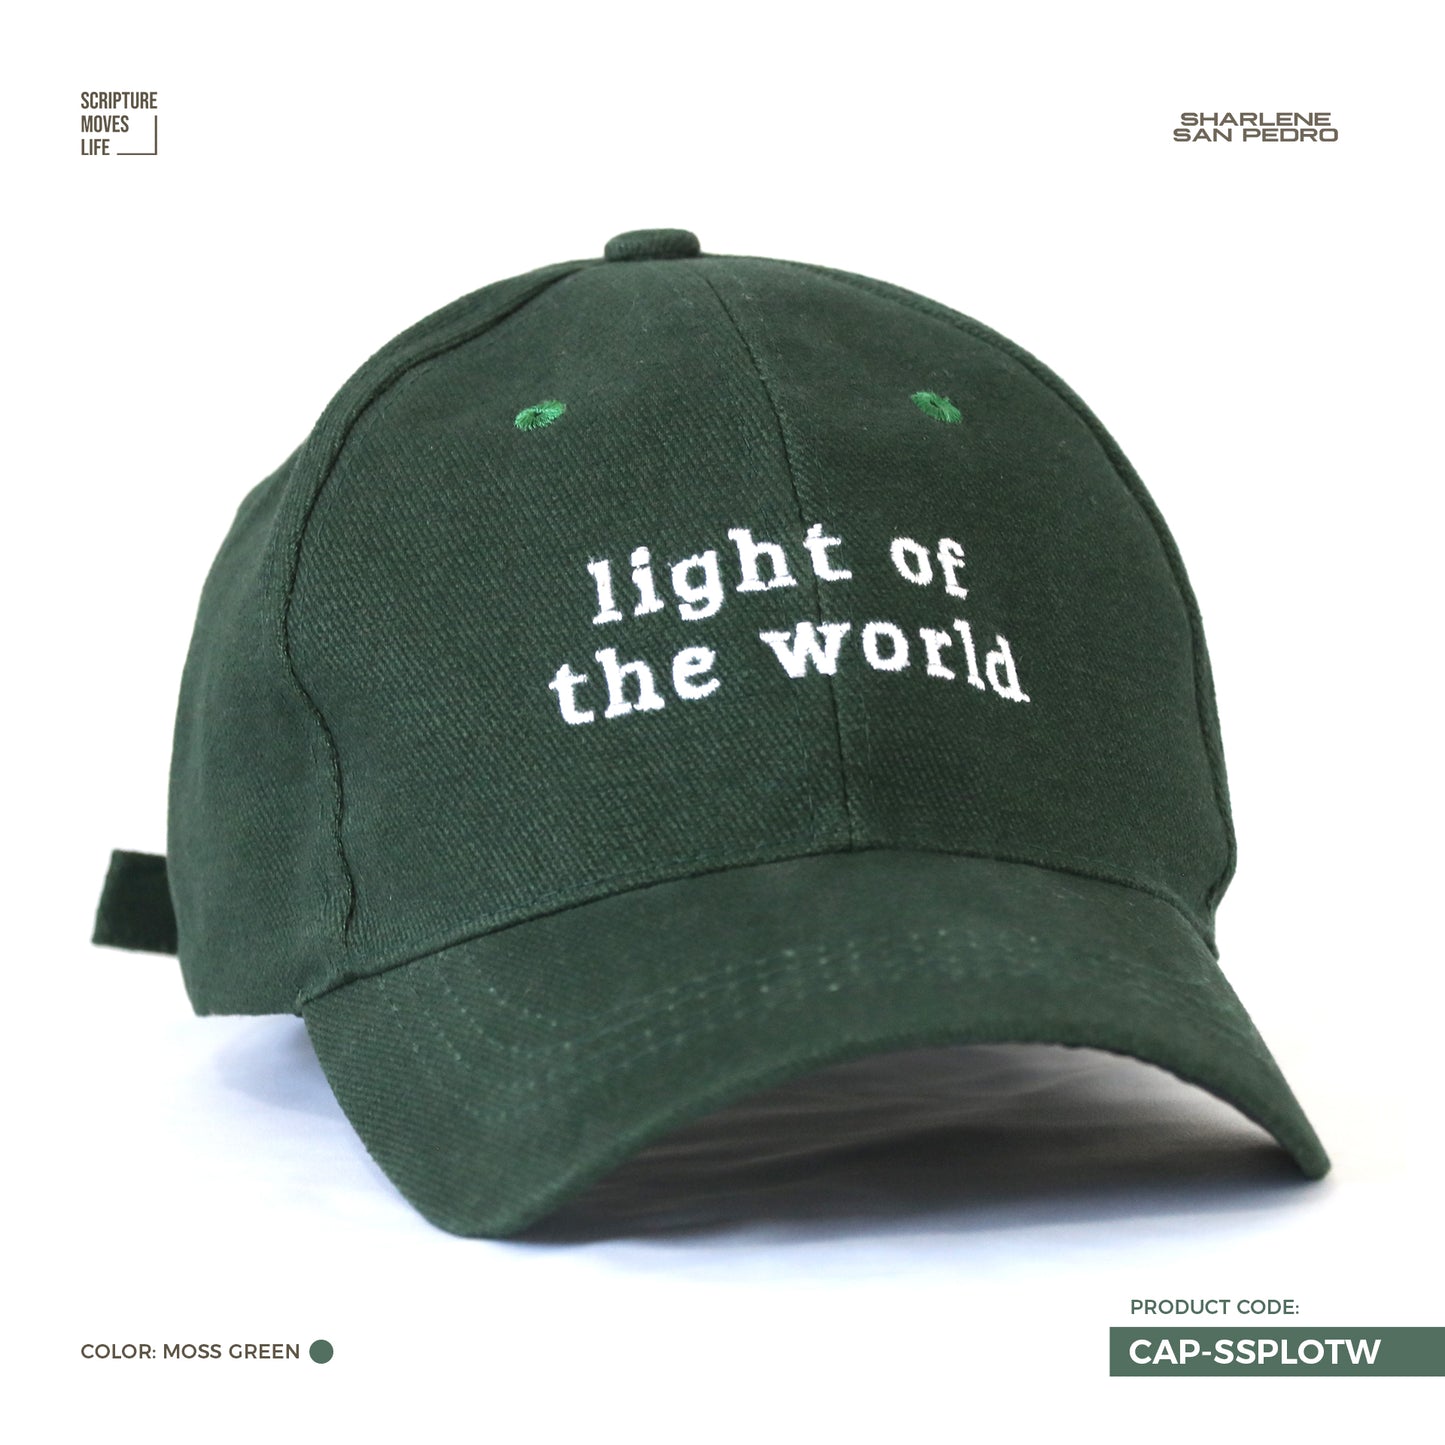 Cap- Light of the World by Sharlene San Pedro x Scripture Moves Life